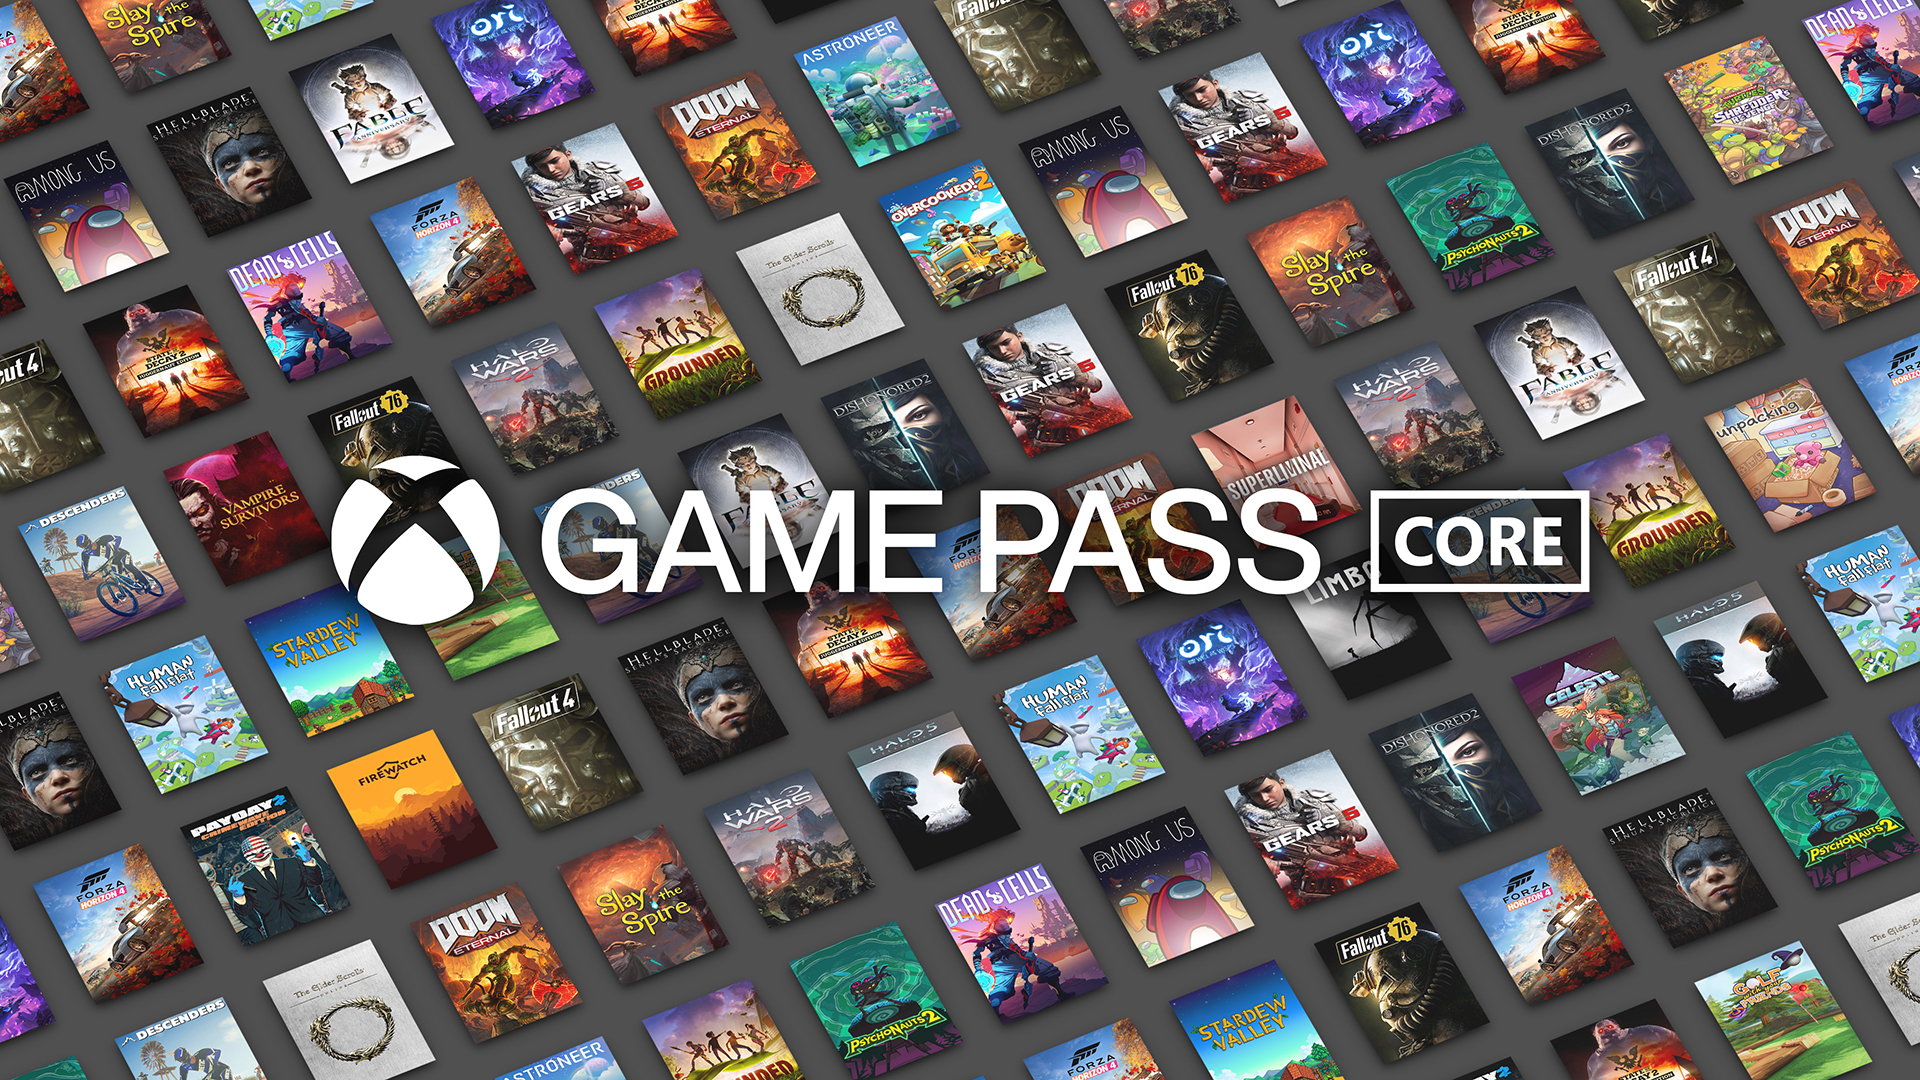 Coming to Xbox Game Pass: Party Animals, Gotham Knights, Payday 3, and More  - Xbox Wire